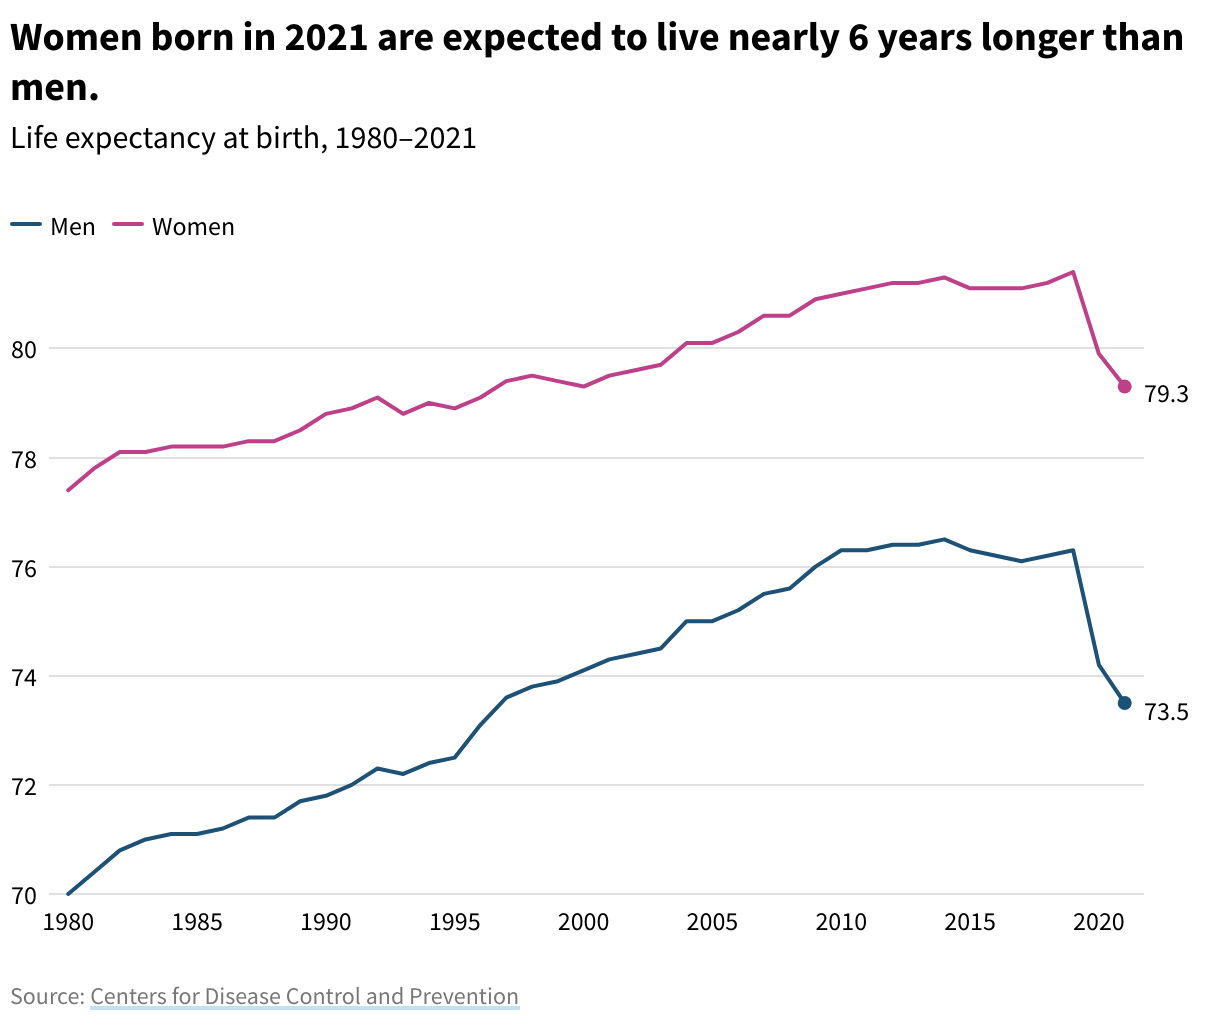 Line chart showing the life expectancy at birth for men and women in the US. Men have a lower life expectancy, and both lines have dropped since 2019 after gradually rising for decades. 